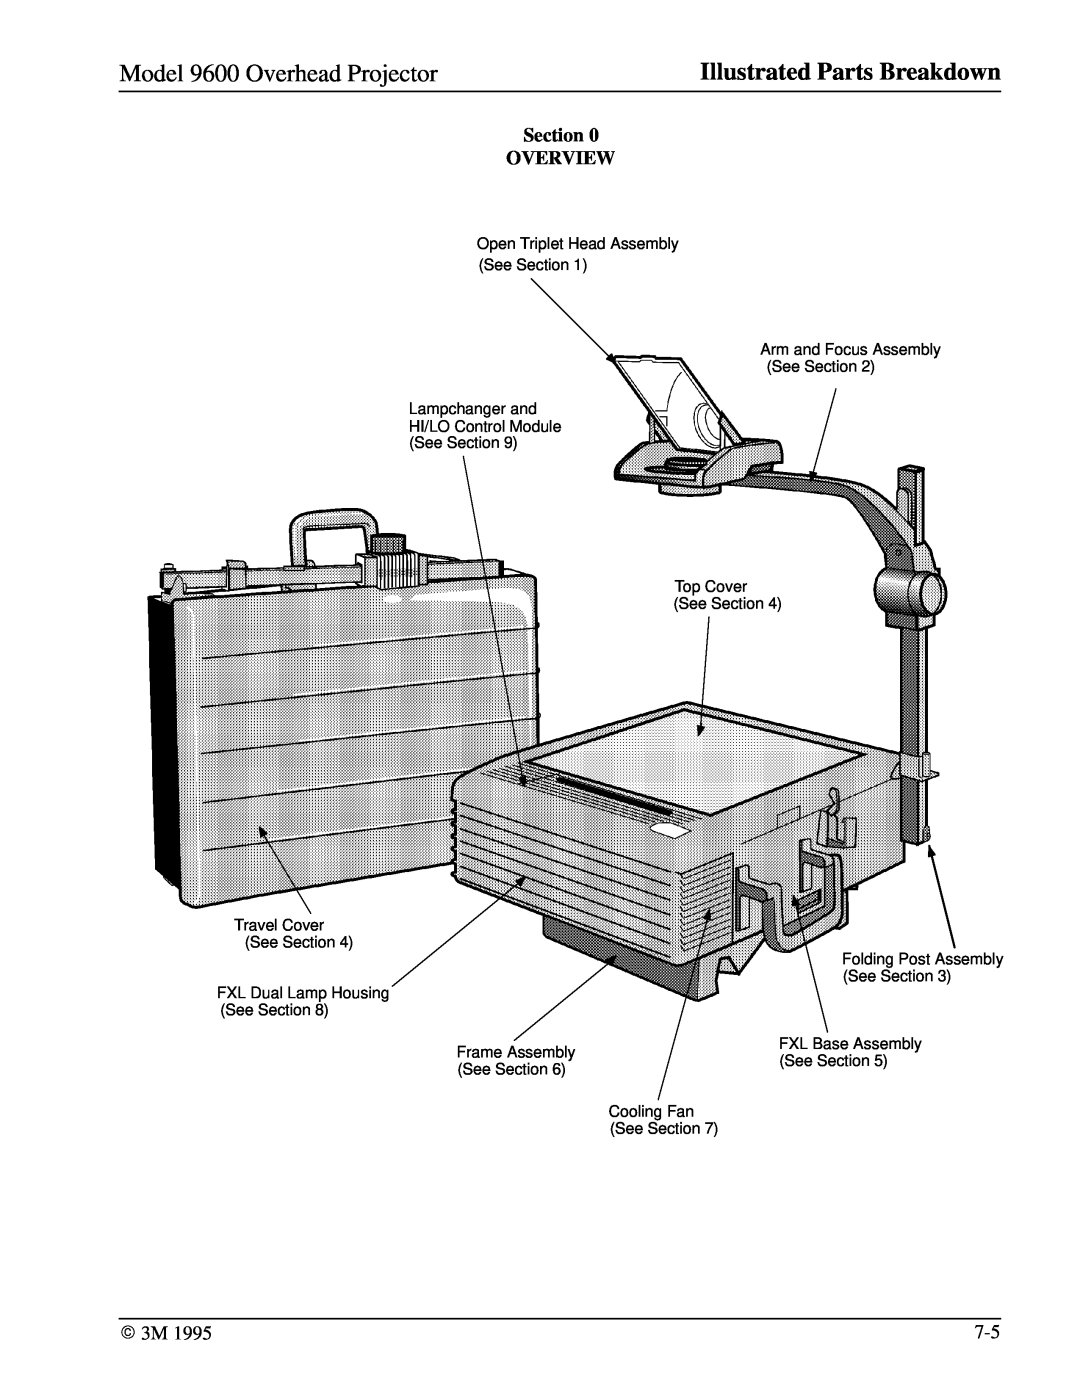 3M manual Section OVERVIEW, Model 9600 Overhead Projector, Illustrated Parts Breakdown, Folding Post Assembly 